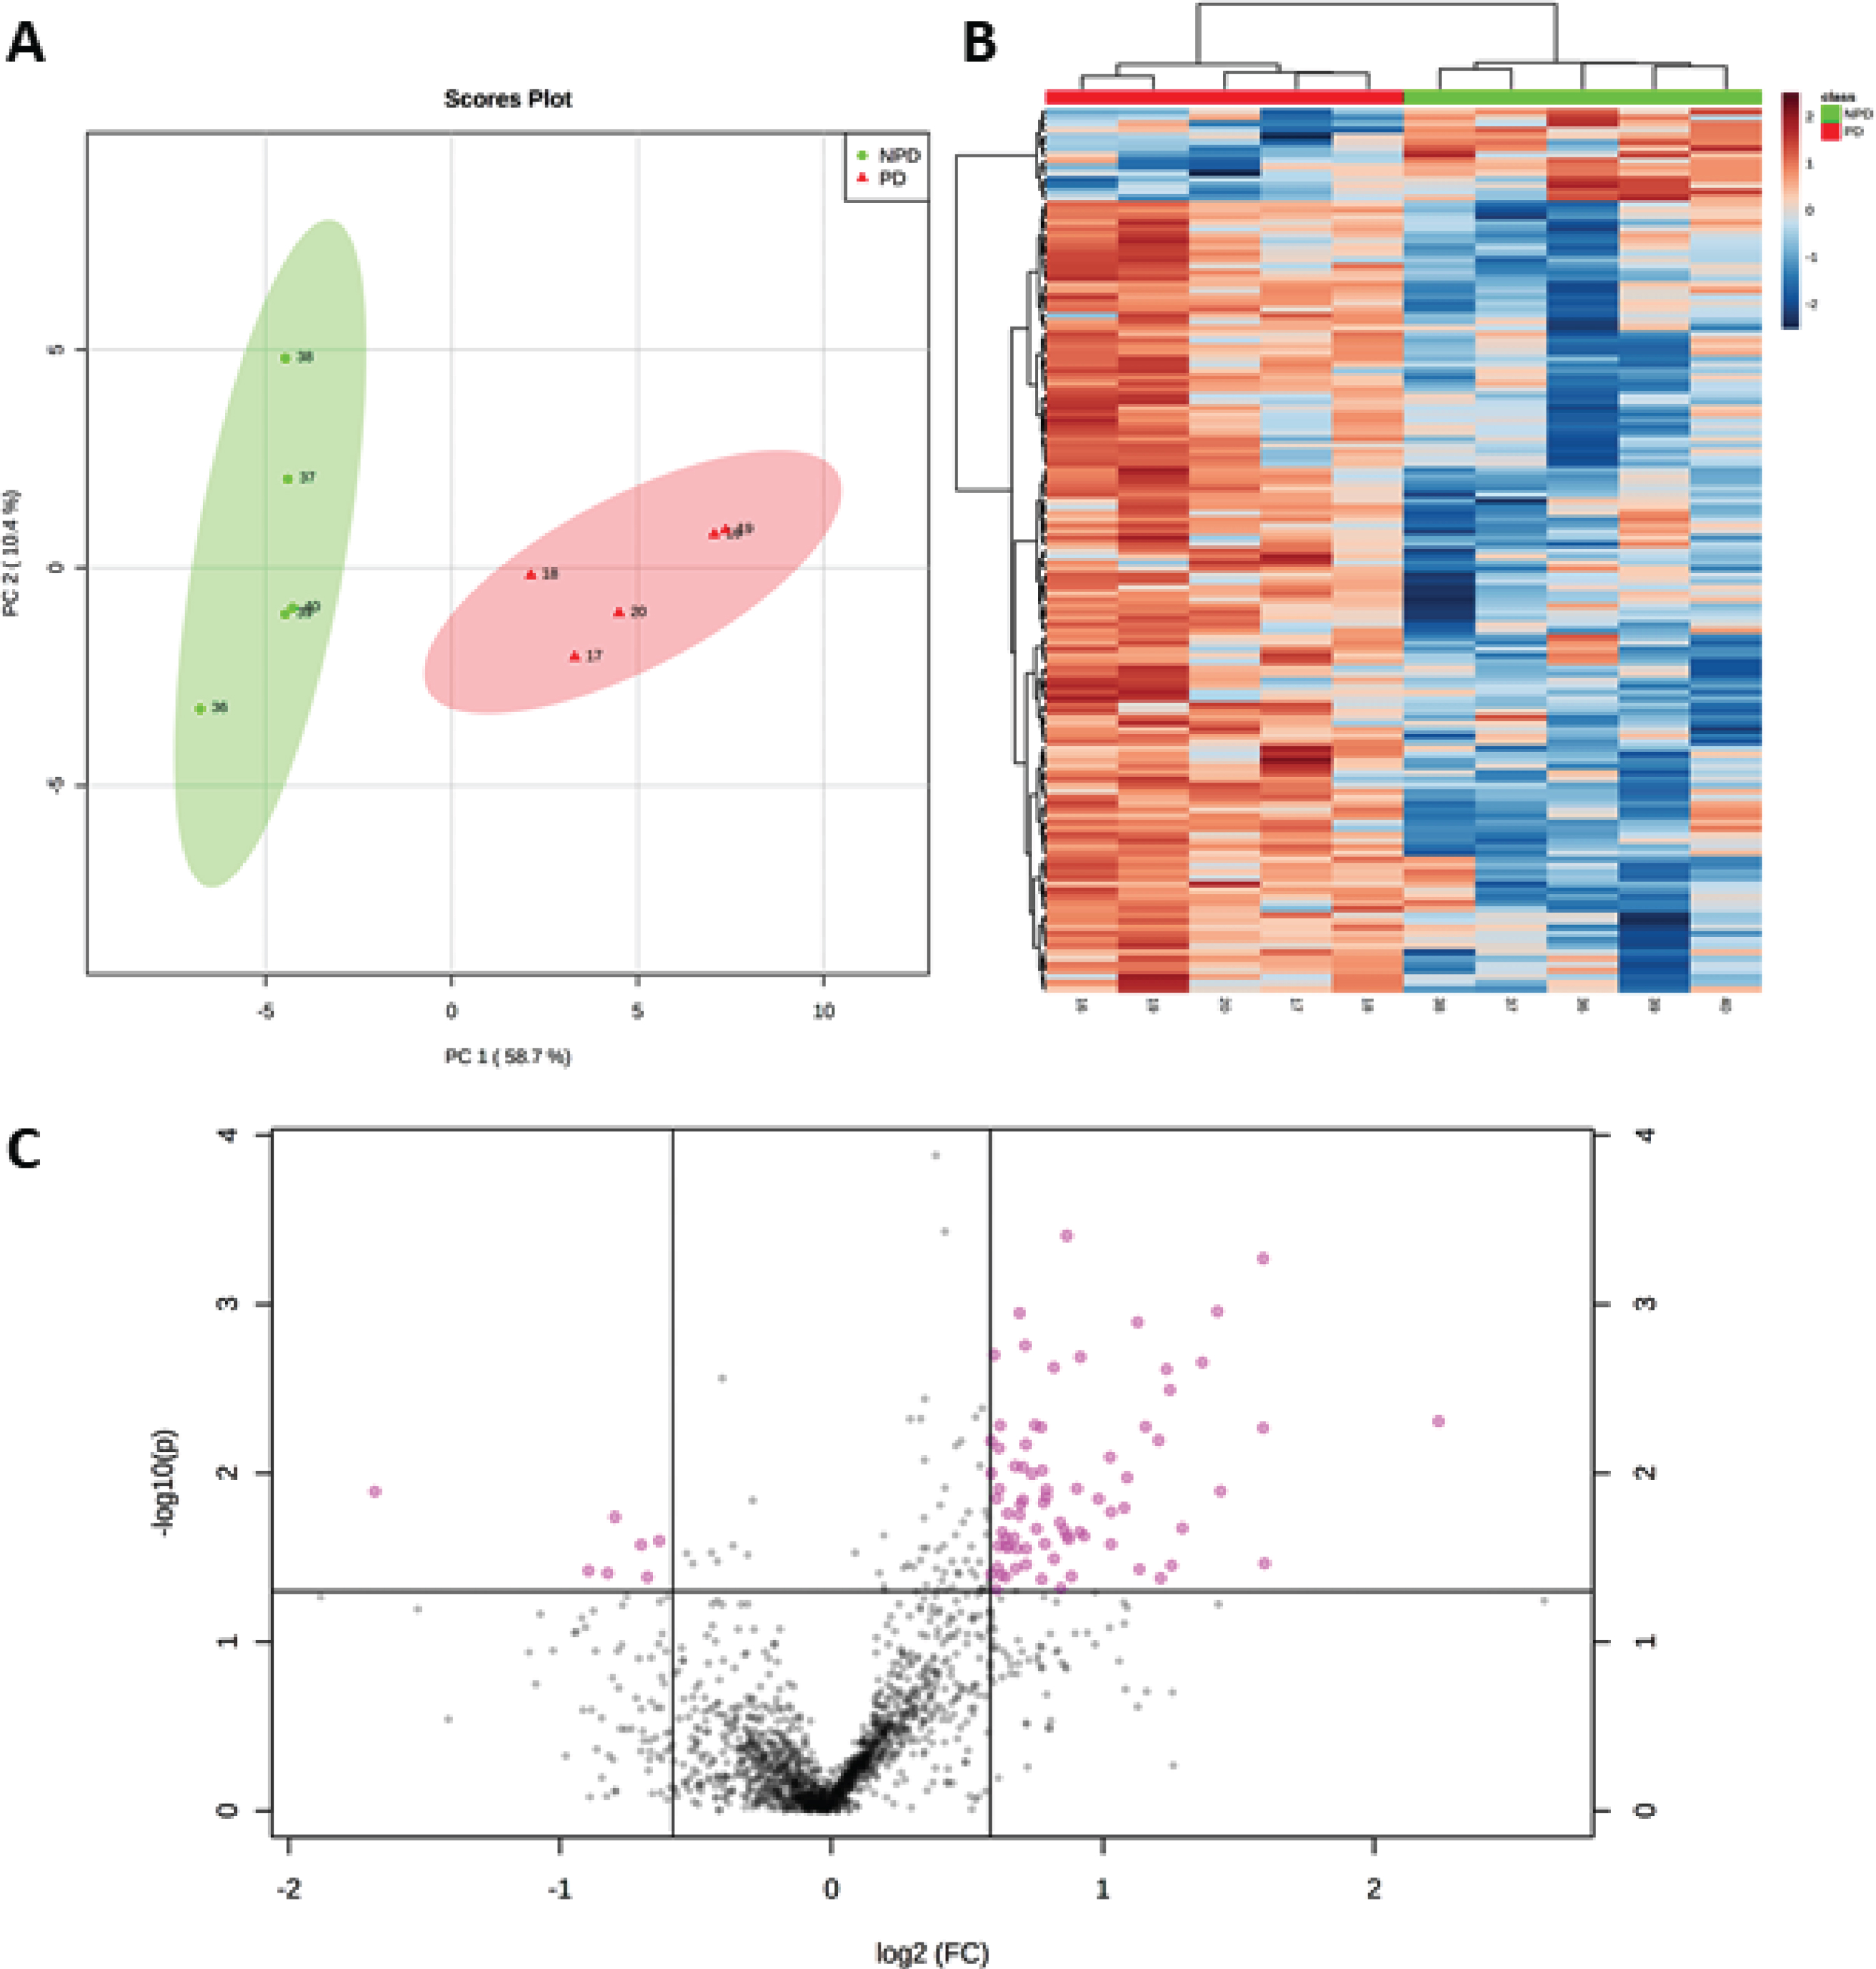 A) PCA plot, using principal components 1 and 2, shows that the NPD cases (green dots) and PD cases (red triangles) are distributed in two well-separated groups based on significantly altered proteins in PD (p < 0.05). B) Heat map of proteins with levels varying significantly (p < 0.05) across PD and NPD cases and used for sample clustering. C) Volcano plot showing 7 downregulated and 76 upregulated proteins (pink points) with fold change≥1.5 (or≤0.66) and p < 0.05.